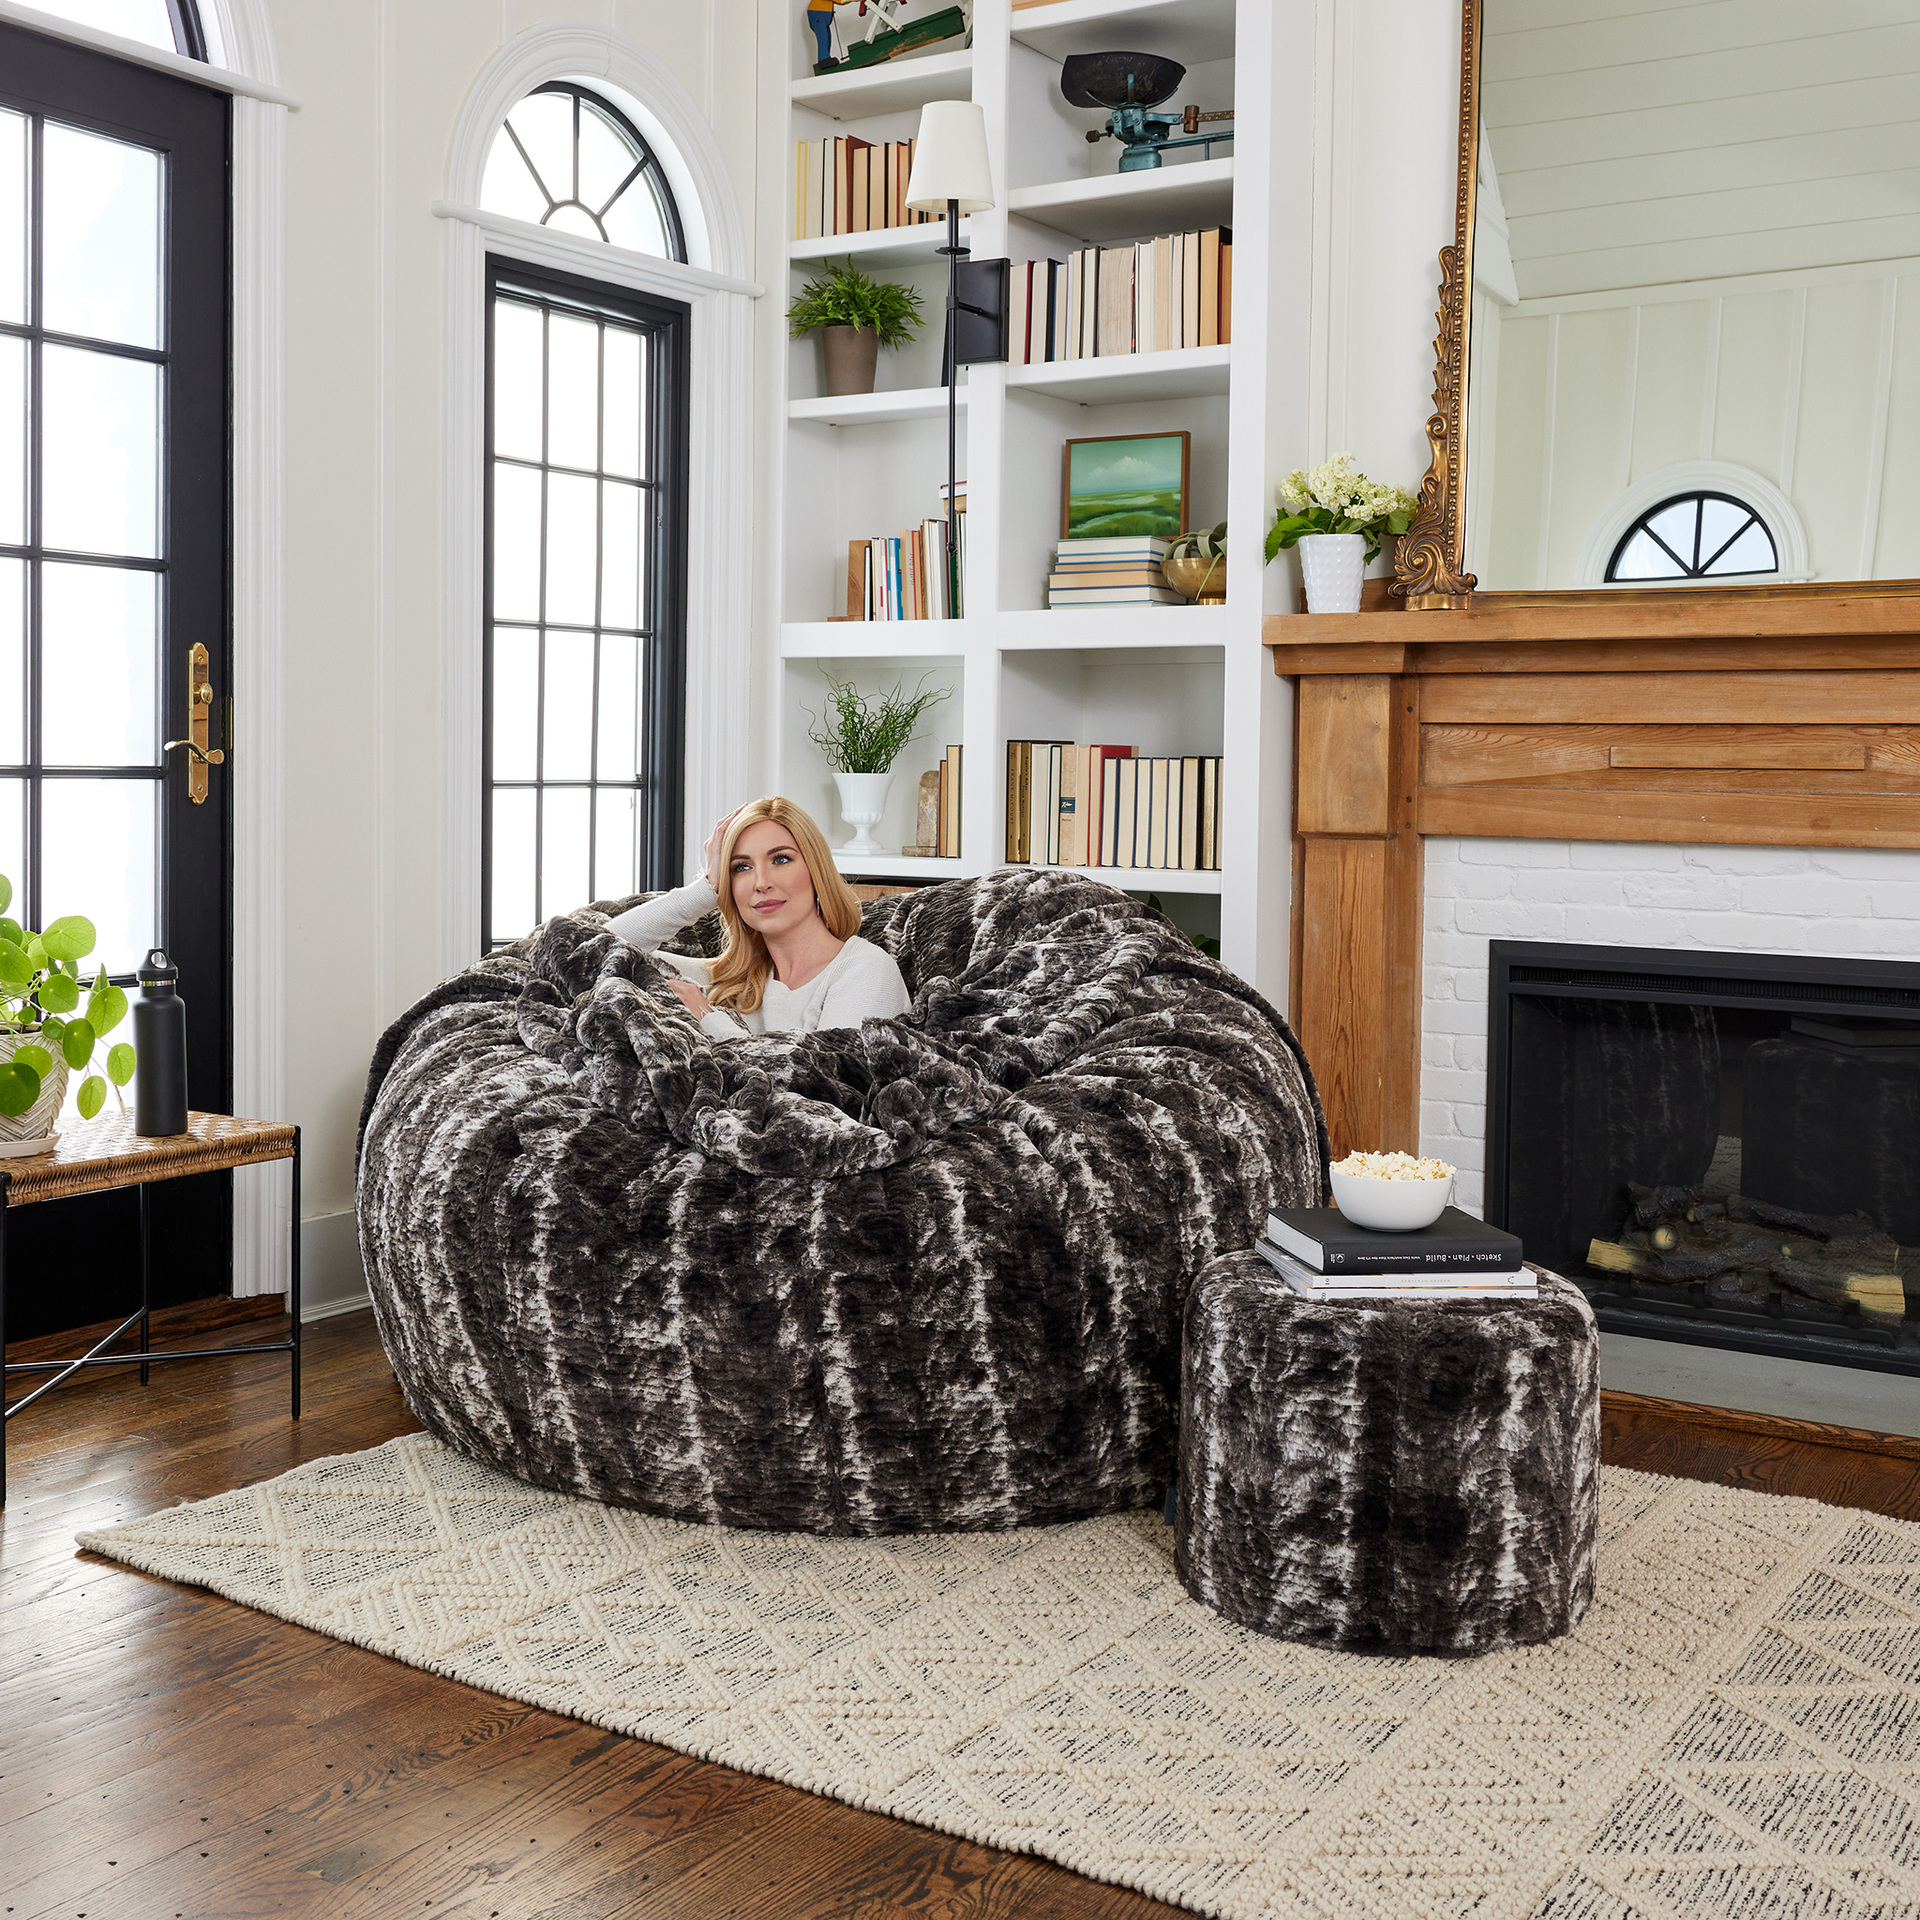 The World’s Most Comfortable Seat LoveSac City Sac Bundle with